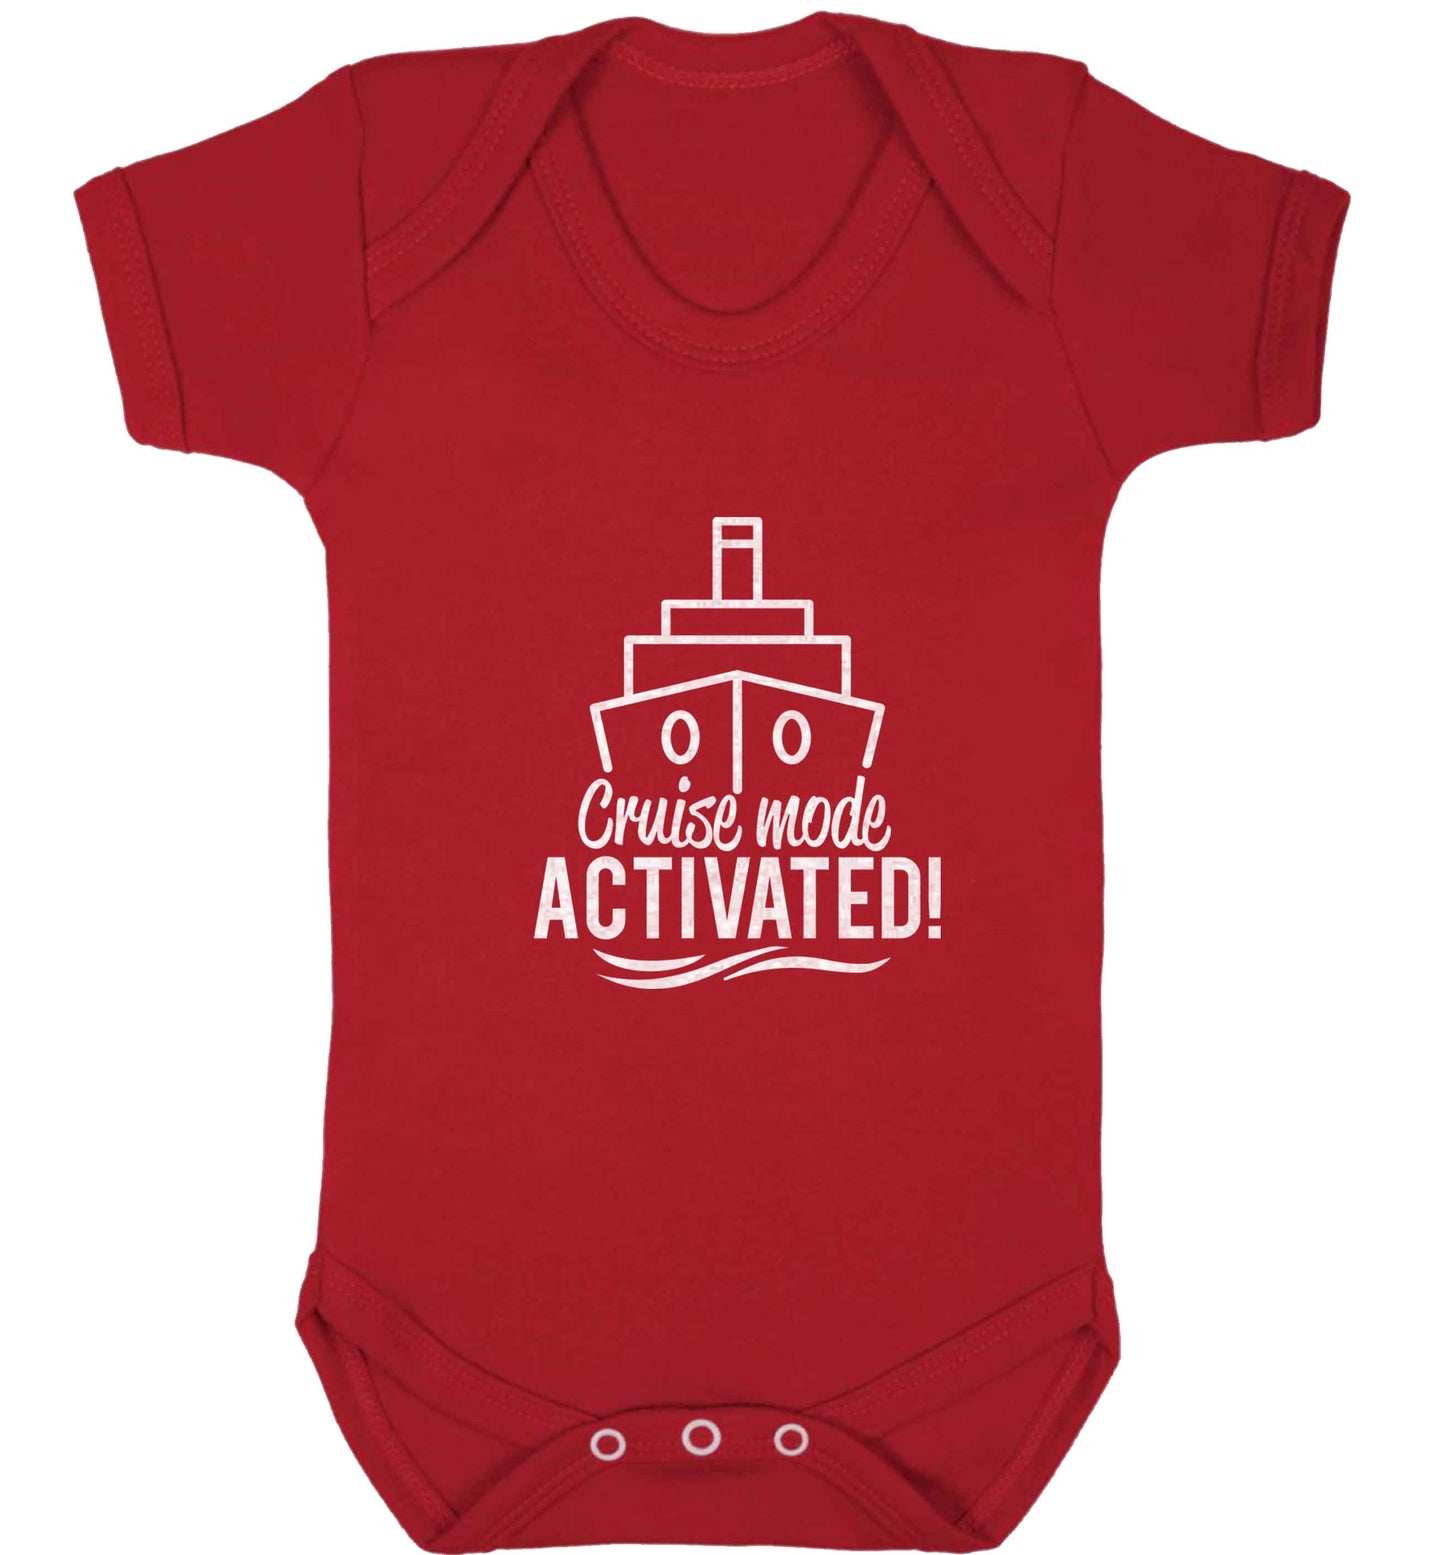 Cruise mode activated baby vest red 18-24 months